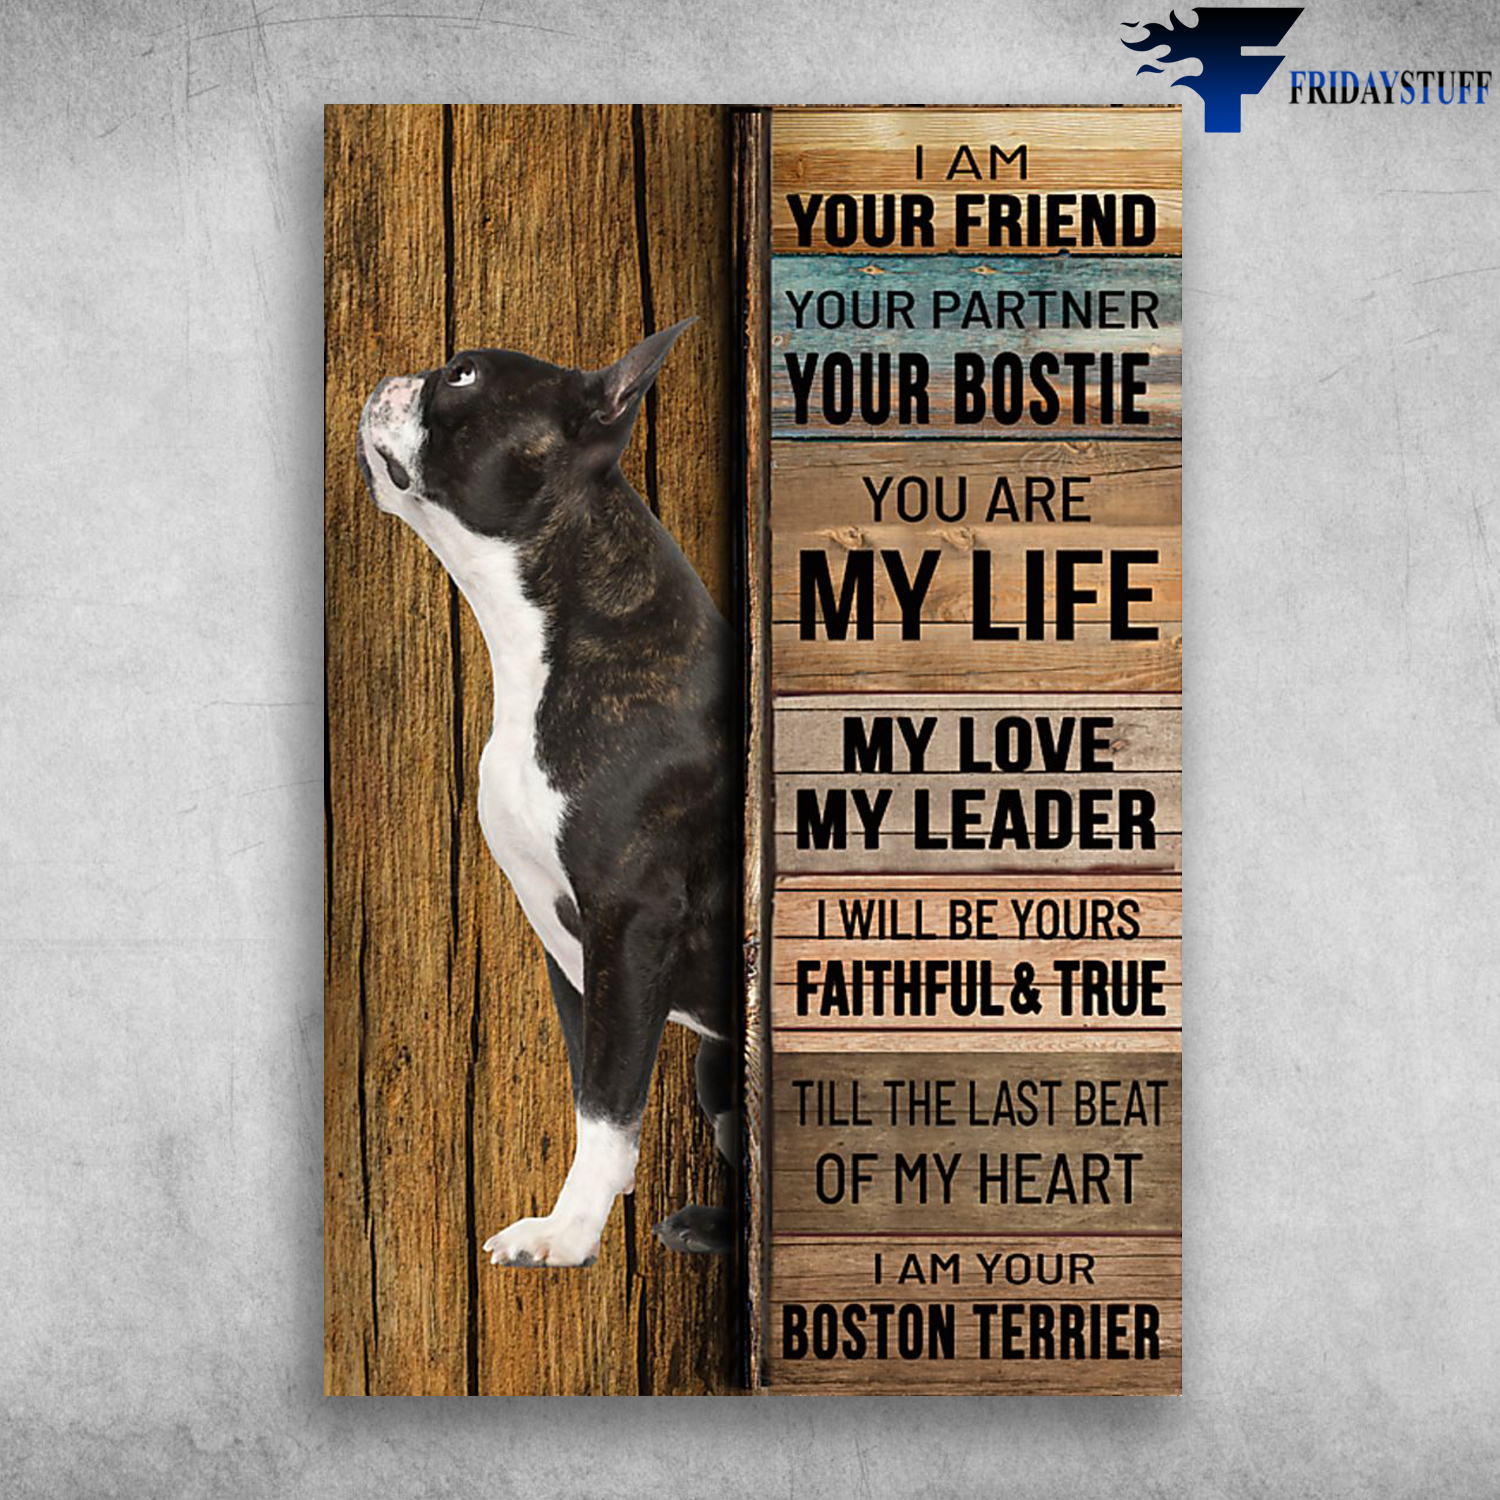 Boston Terrier - I Am Your Friend, Your Partner, Your Boston Terrier, You Are My Life, My Love, My Leader, I Will Be Yours Faithful And True, Till The Last Beat Of My Heart, I Am Your Boston Terrier